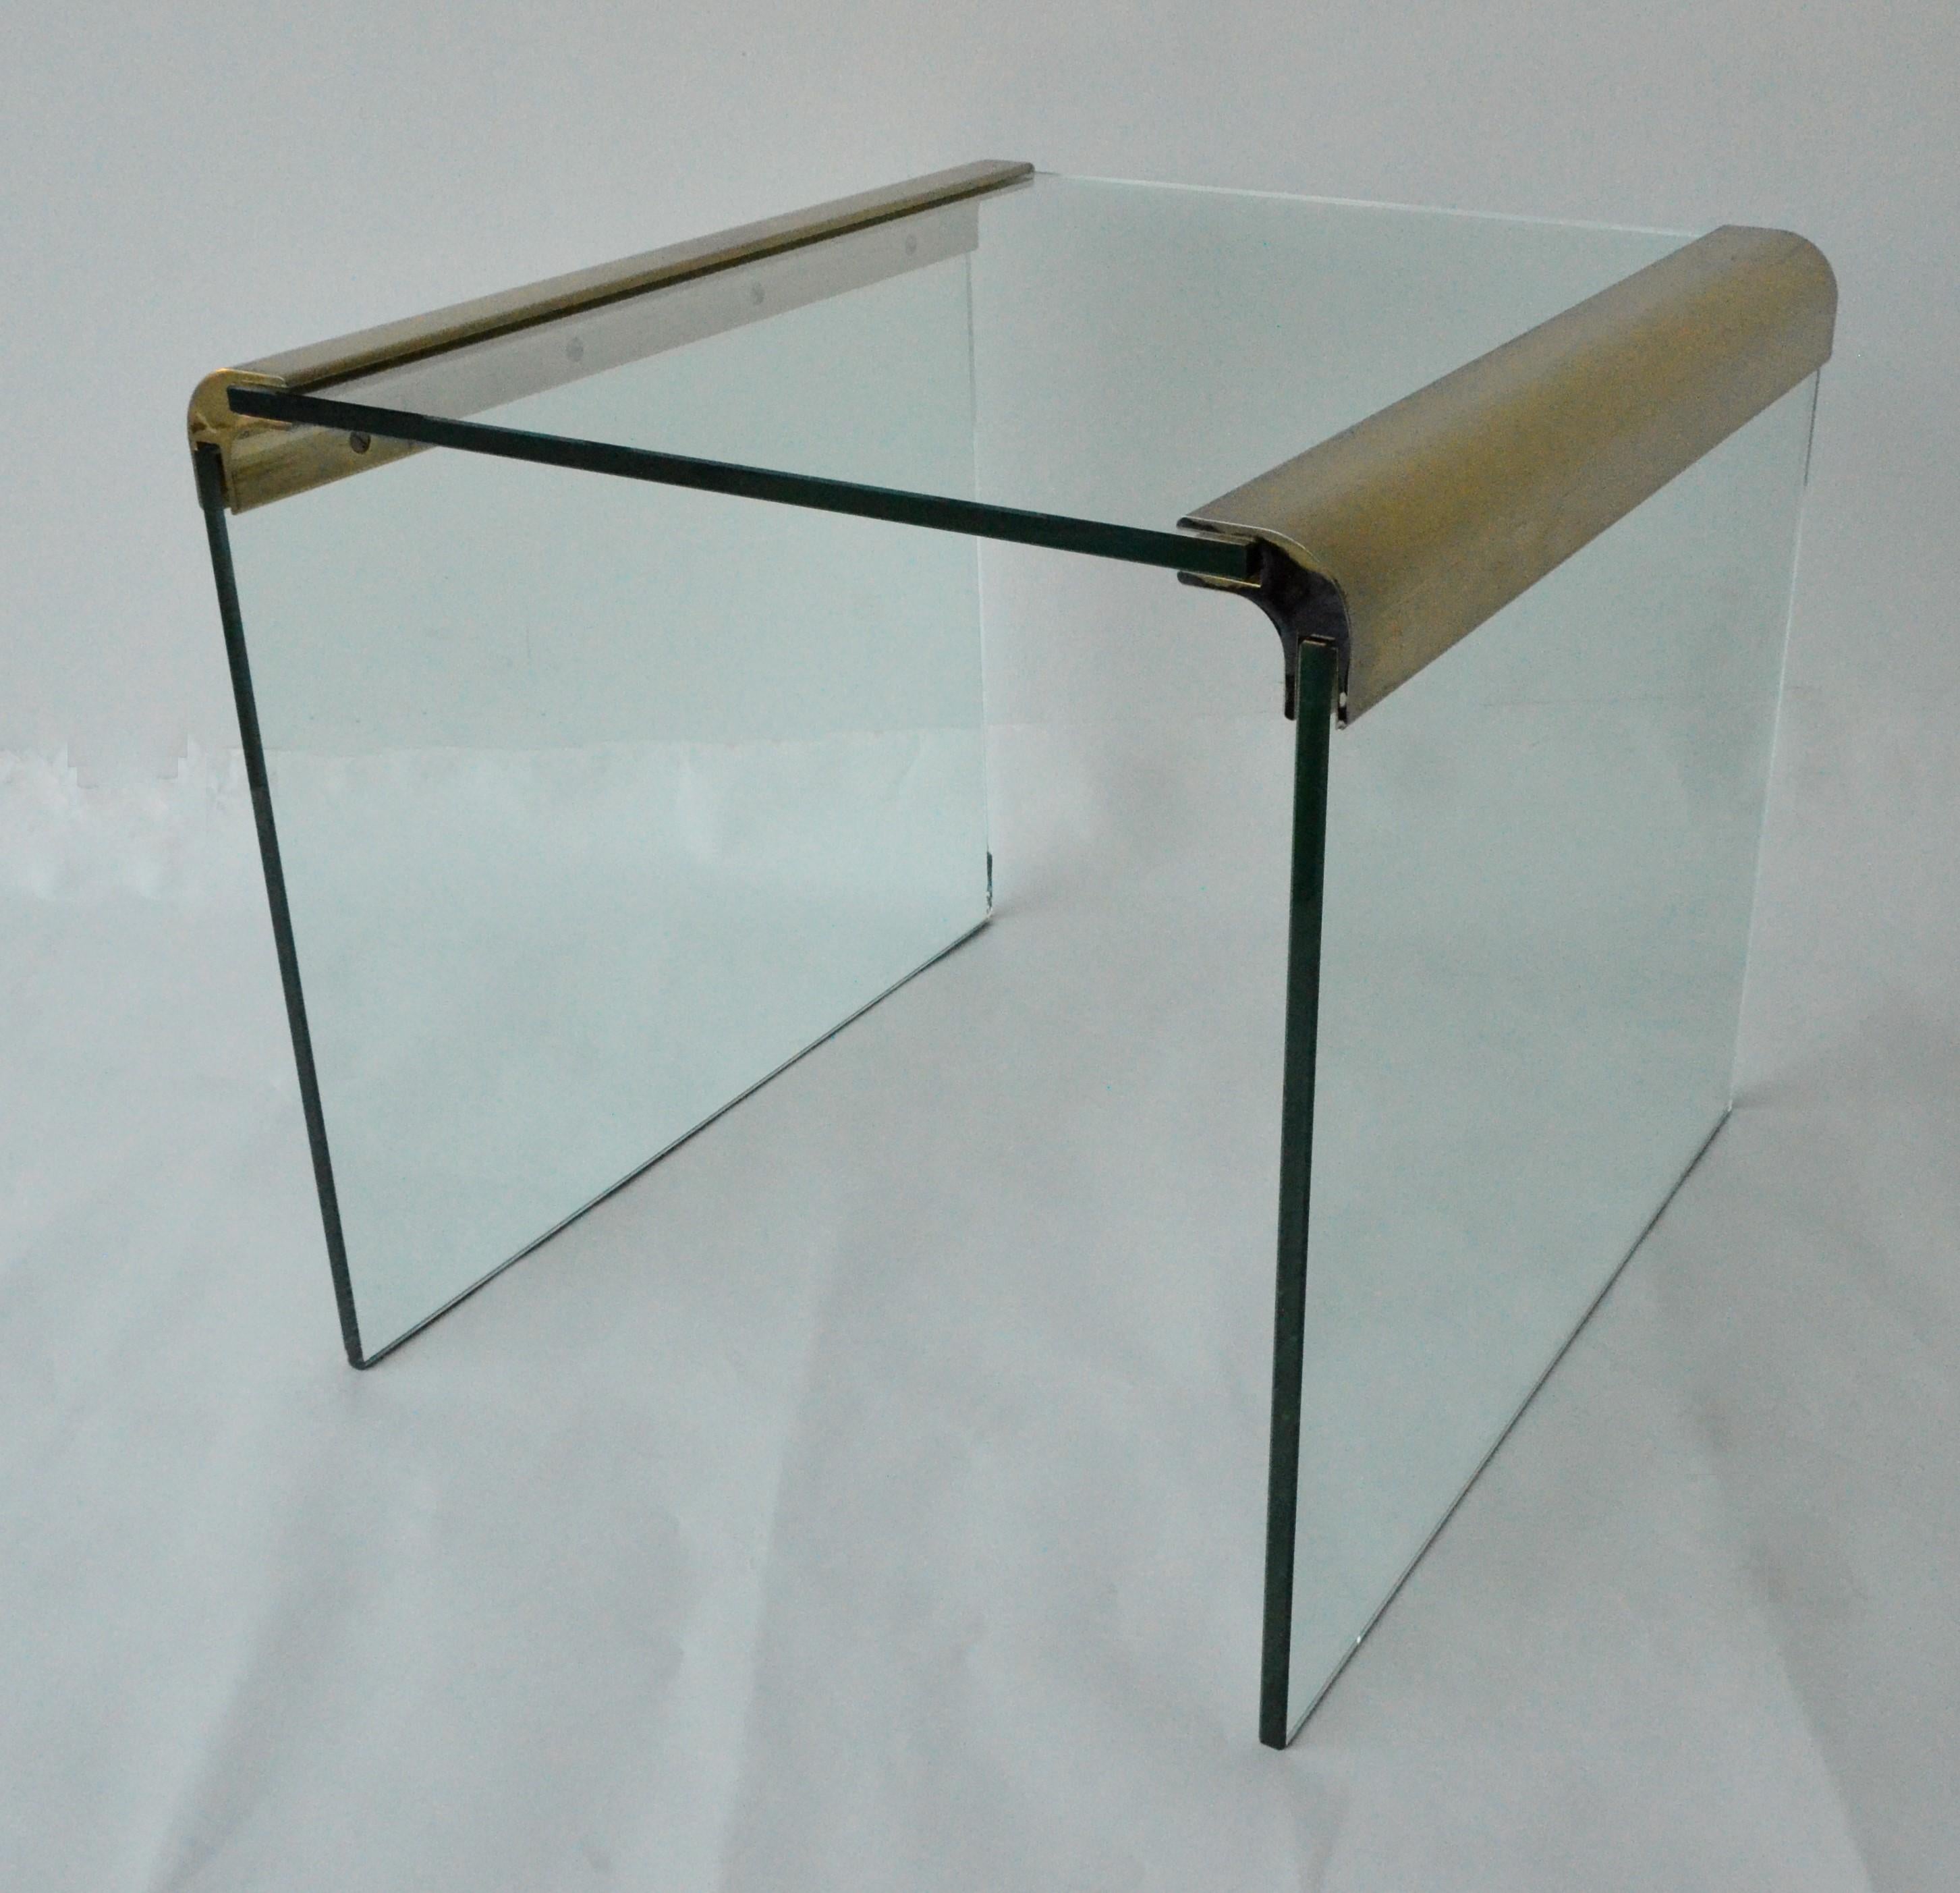 3 sided end table